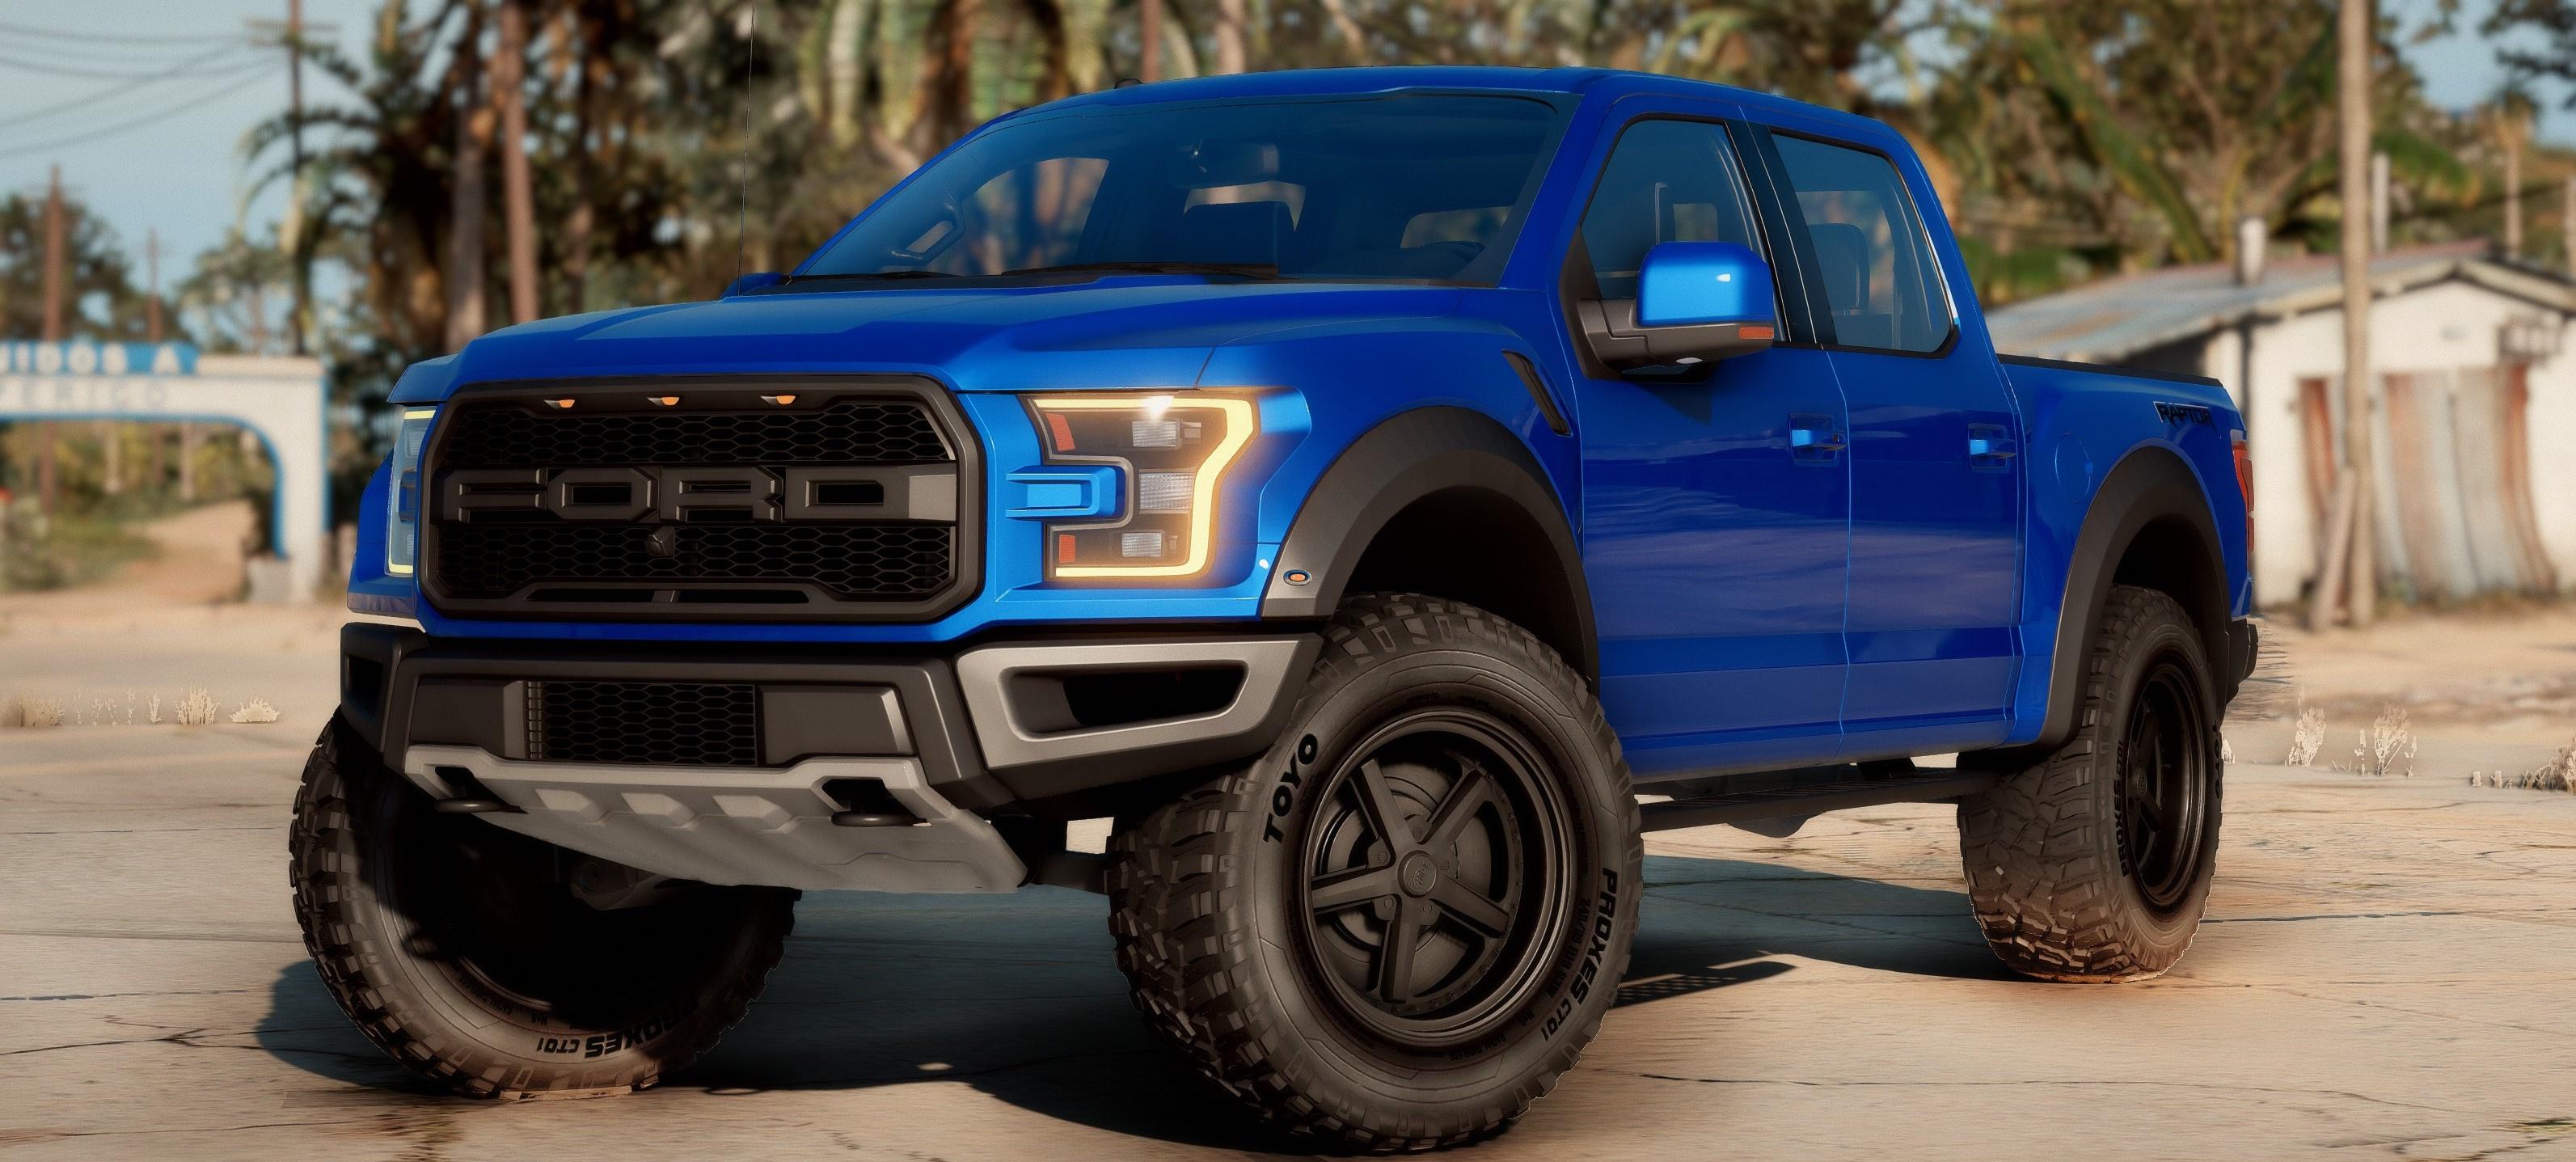 Is the ford raptor in gta 5 фото 2